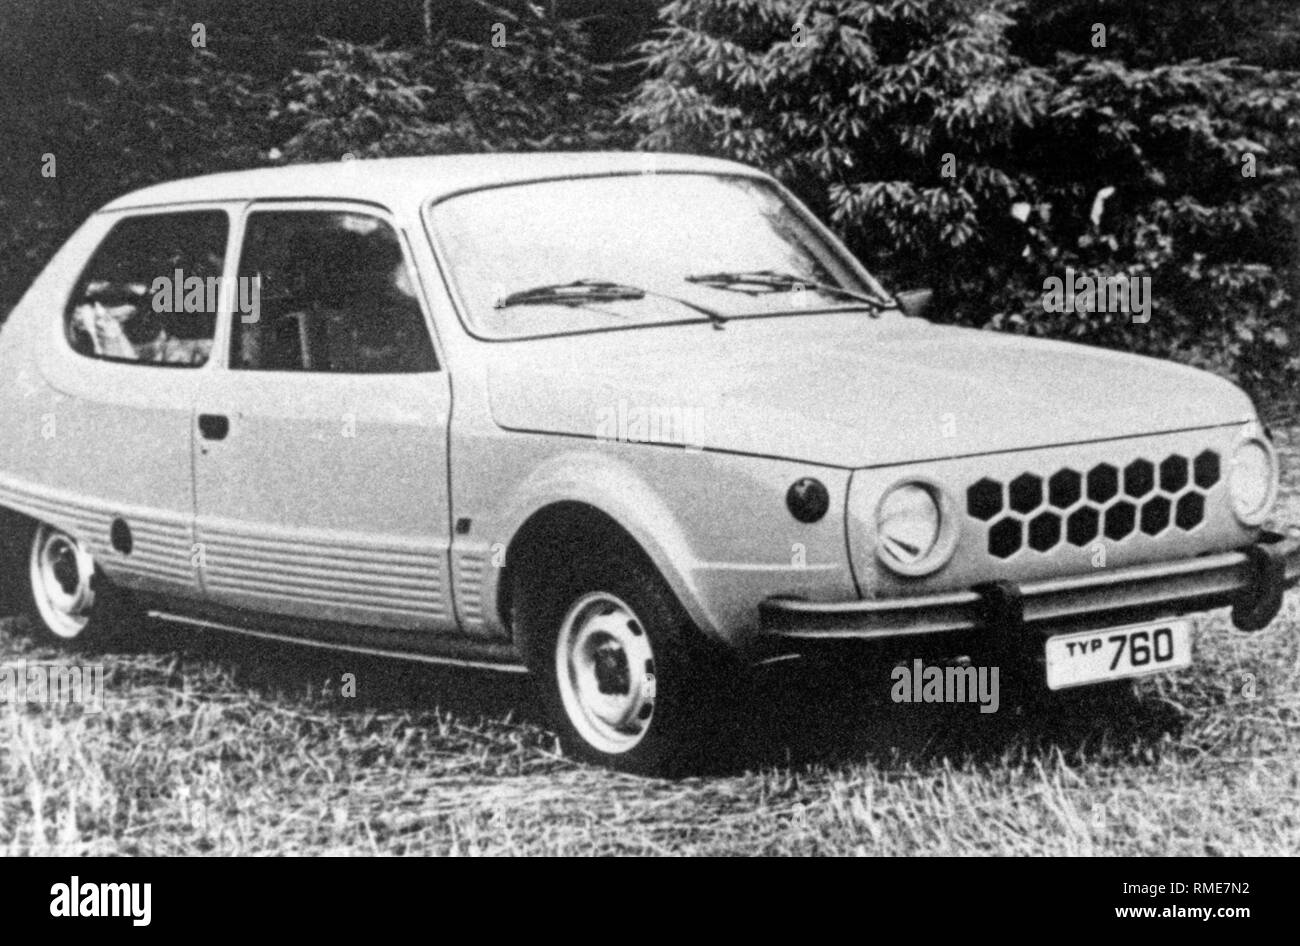 Prototype of the 'RGW car' P760. The P760 was supposed to replace cars such as the Trabant 601, the Wartburg 353 or the Skoda 100 in member countries of the Council for Mutual Economic Assistance. The bodywork was to be developed by each member state on its own. Stock Photo